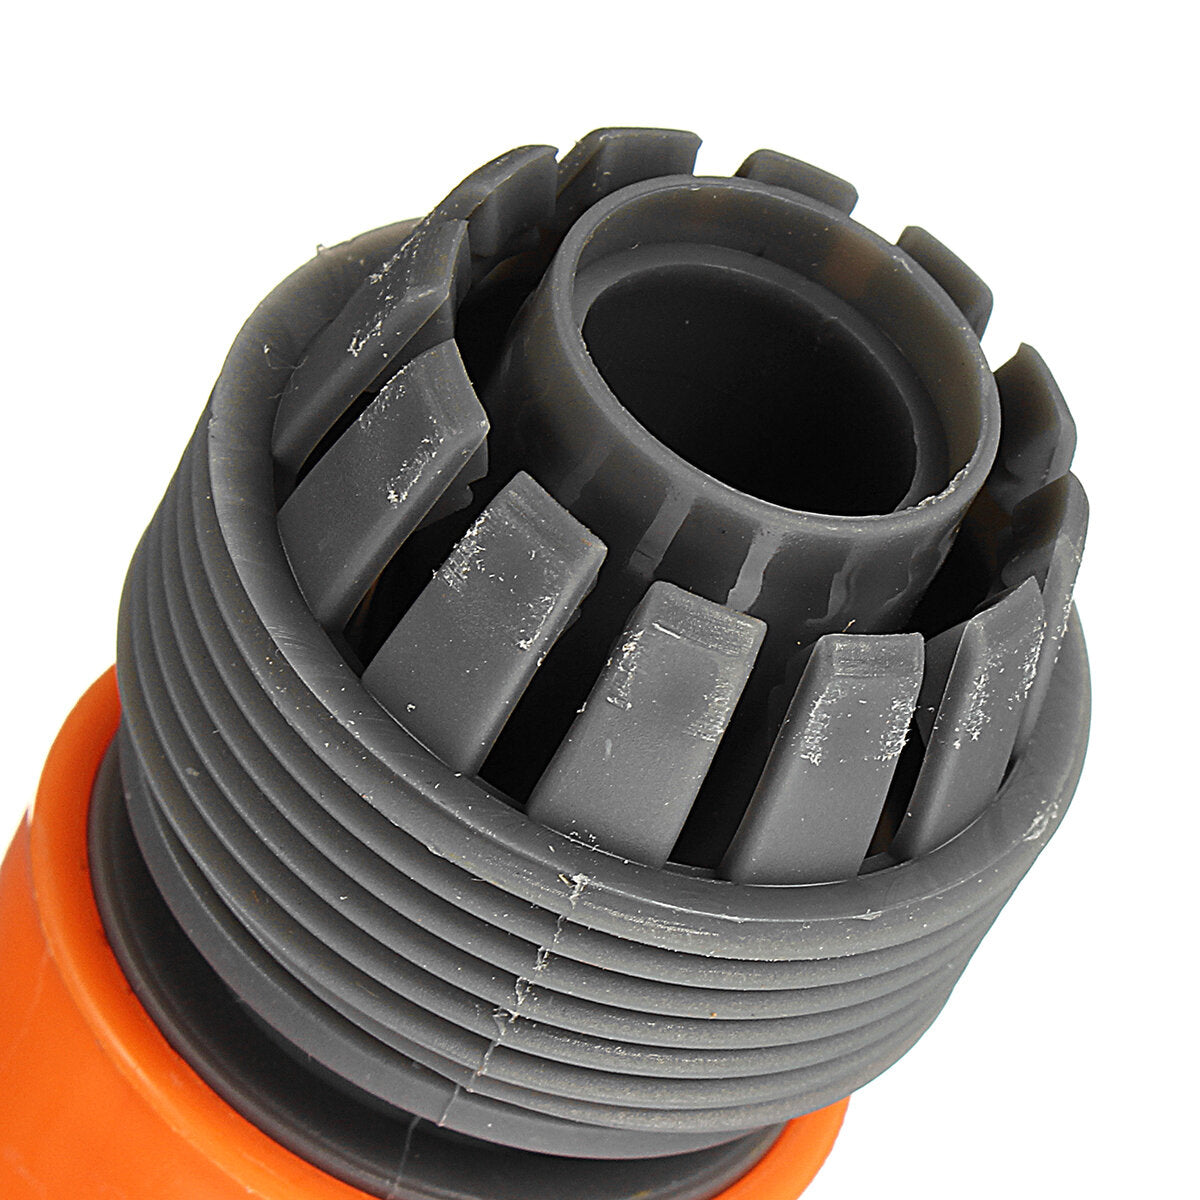 10Pcs Orange 3/4" Garden Joiner Quick Connect Adapter Water Hose Pipe Washing